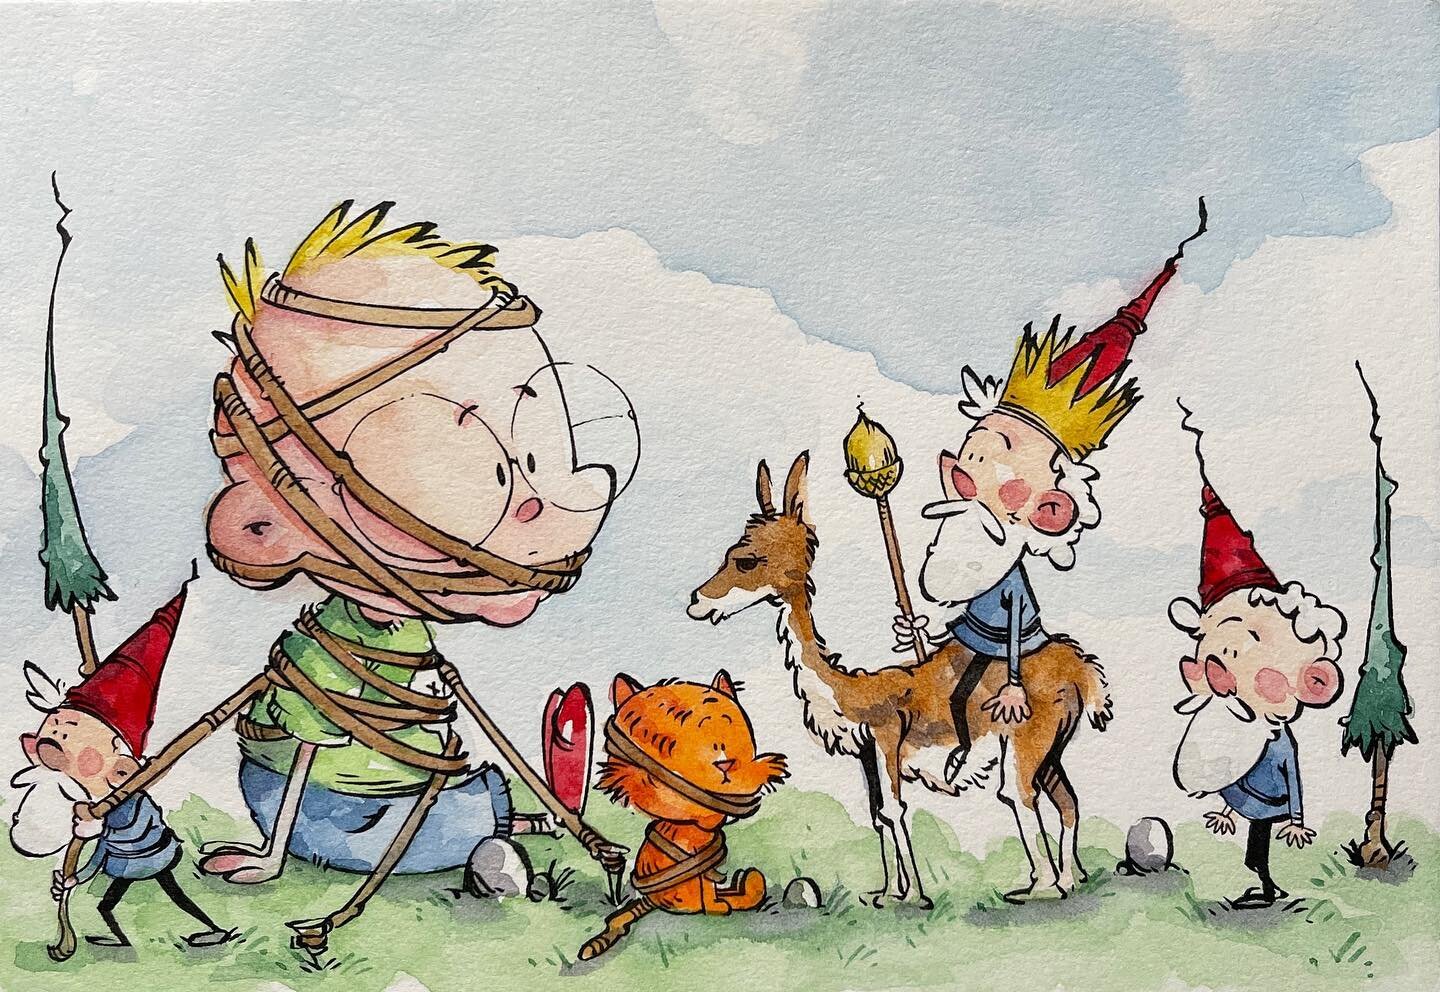 Oh Gil, not again!  Lord Applebottom Nutmeg is a tyrannical ruler of the backyard.  #anthonywheelerart #gil #kidlit #childrensbookillustration #watercolor